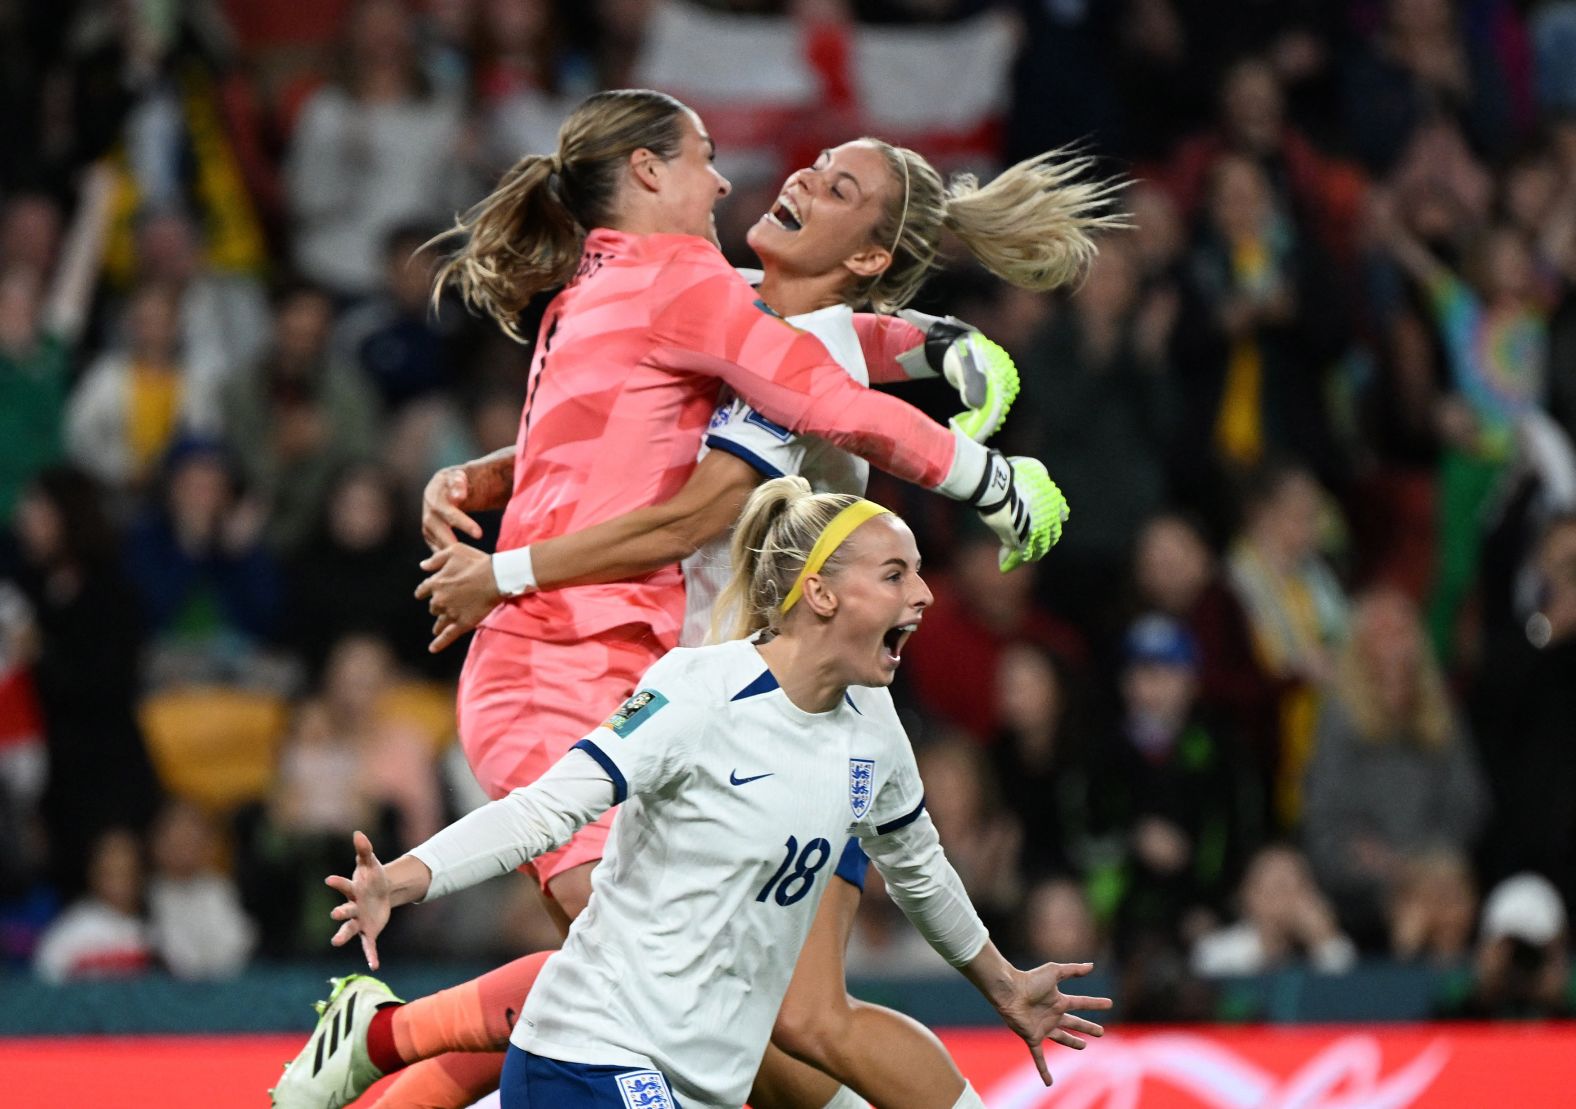 England's Chloe Kelly, bottom, celebrates with teammates Mary Earps, left, and Rachel Daly after scoring the winning penalty against Nigeria in the round of 16 on August 7. <a href="index.php?page=&url=https%3A%2F%2Fedition.cnn.com%2F2023%2F08%2F06%2Ffootball%2Fengland-nigeria-australia-denmark-womens-world-cup-2023-spt-intl%2Findex.html" target="_blank">The match went to a shootout</a> after ending 0-0.